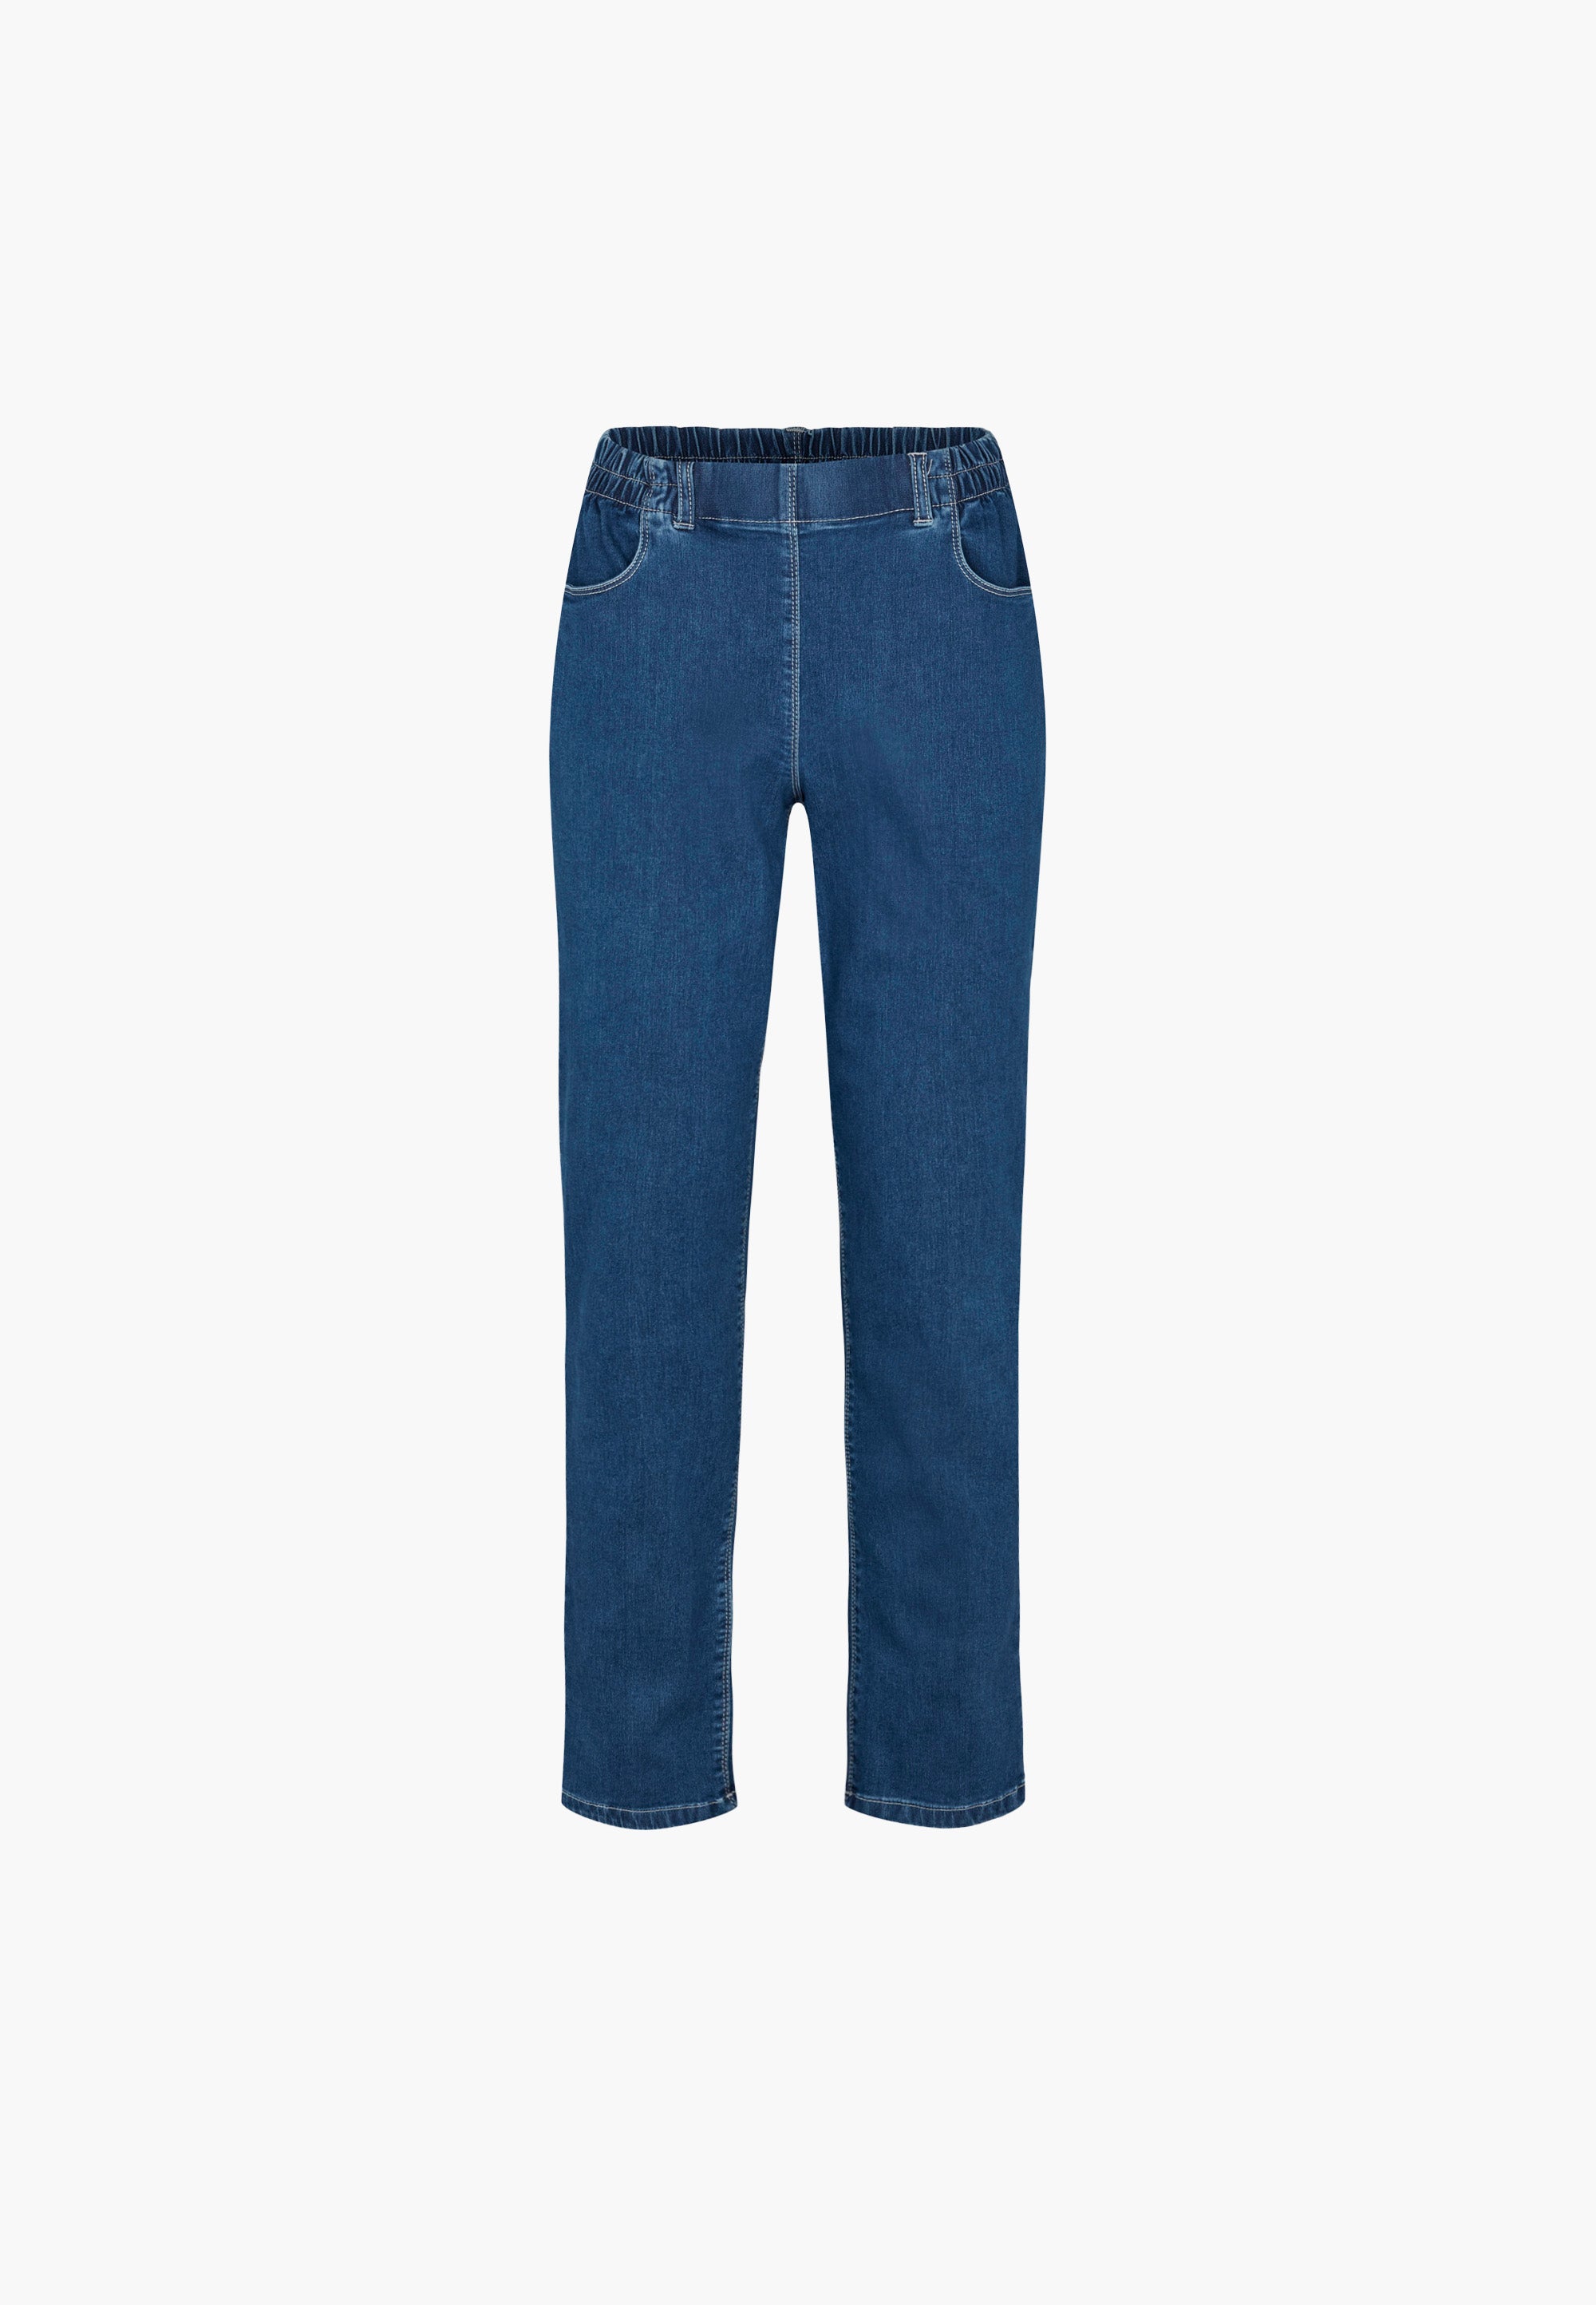 LAURIE  Violet Relaxed - Medium Length Trousers RELAXED 49401 Blue Denim